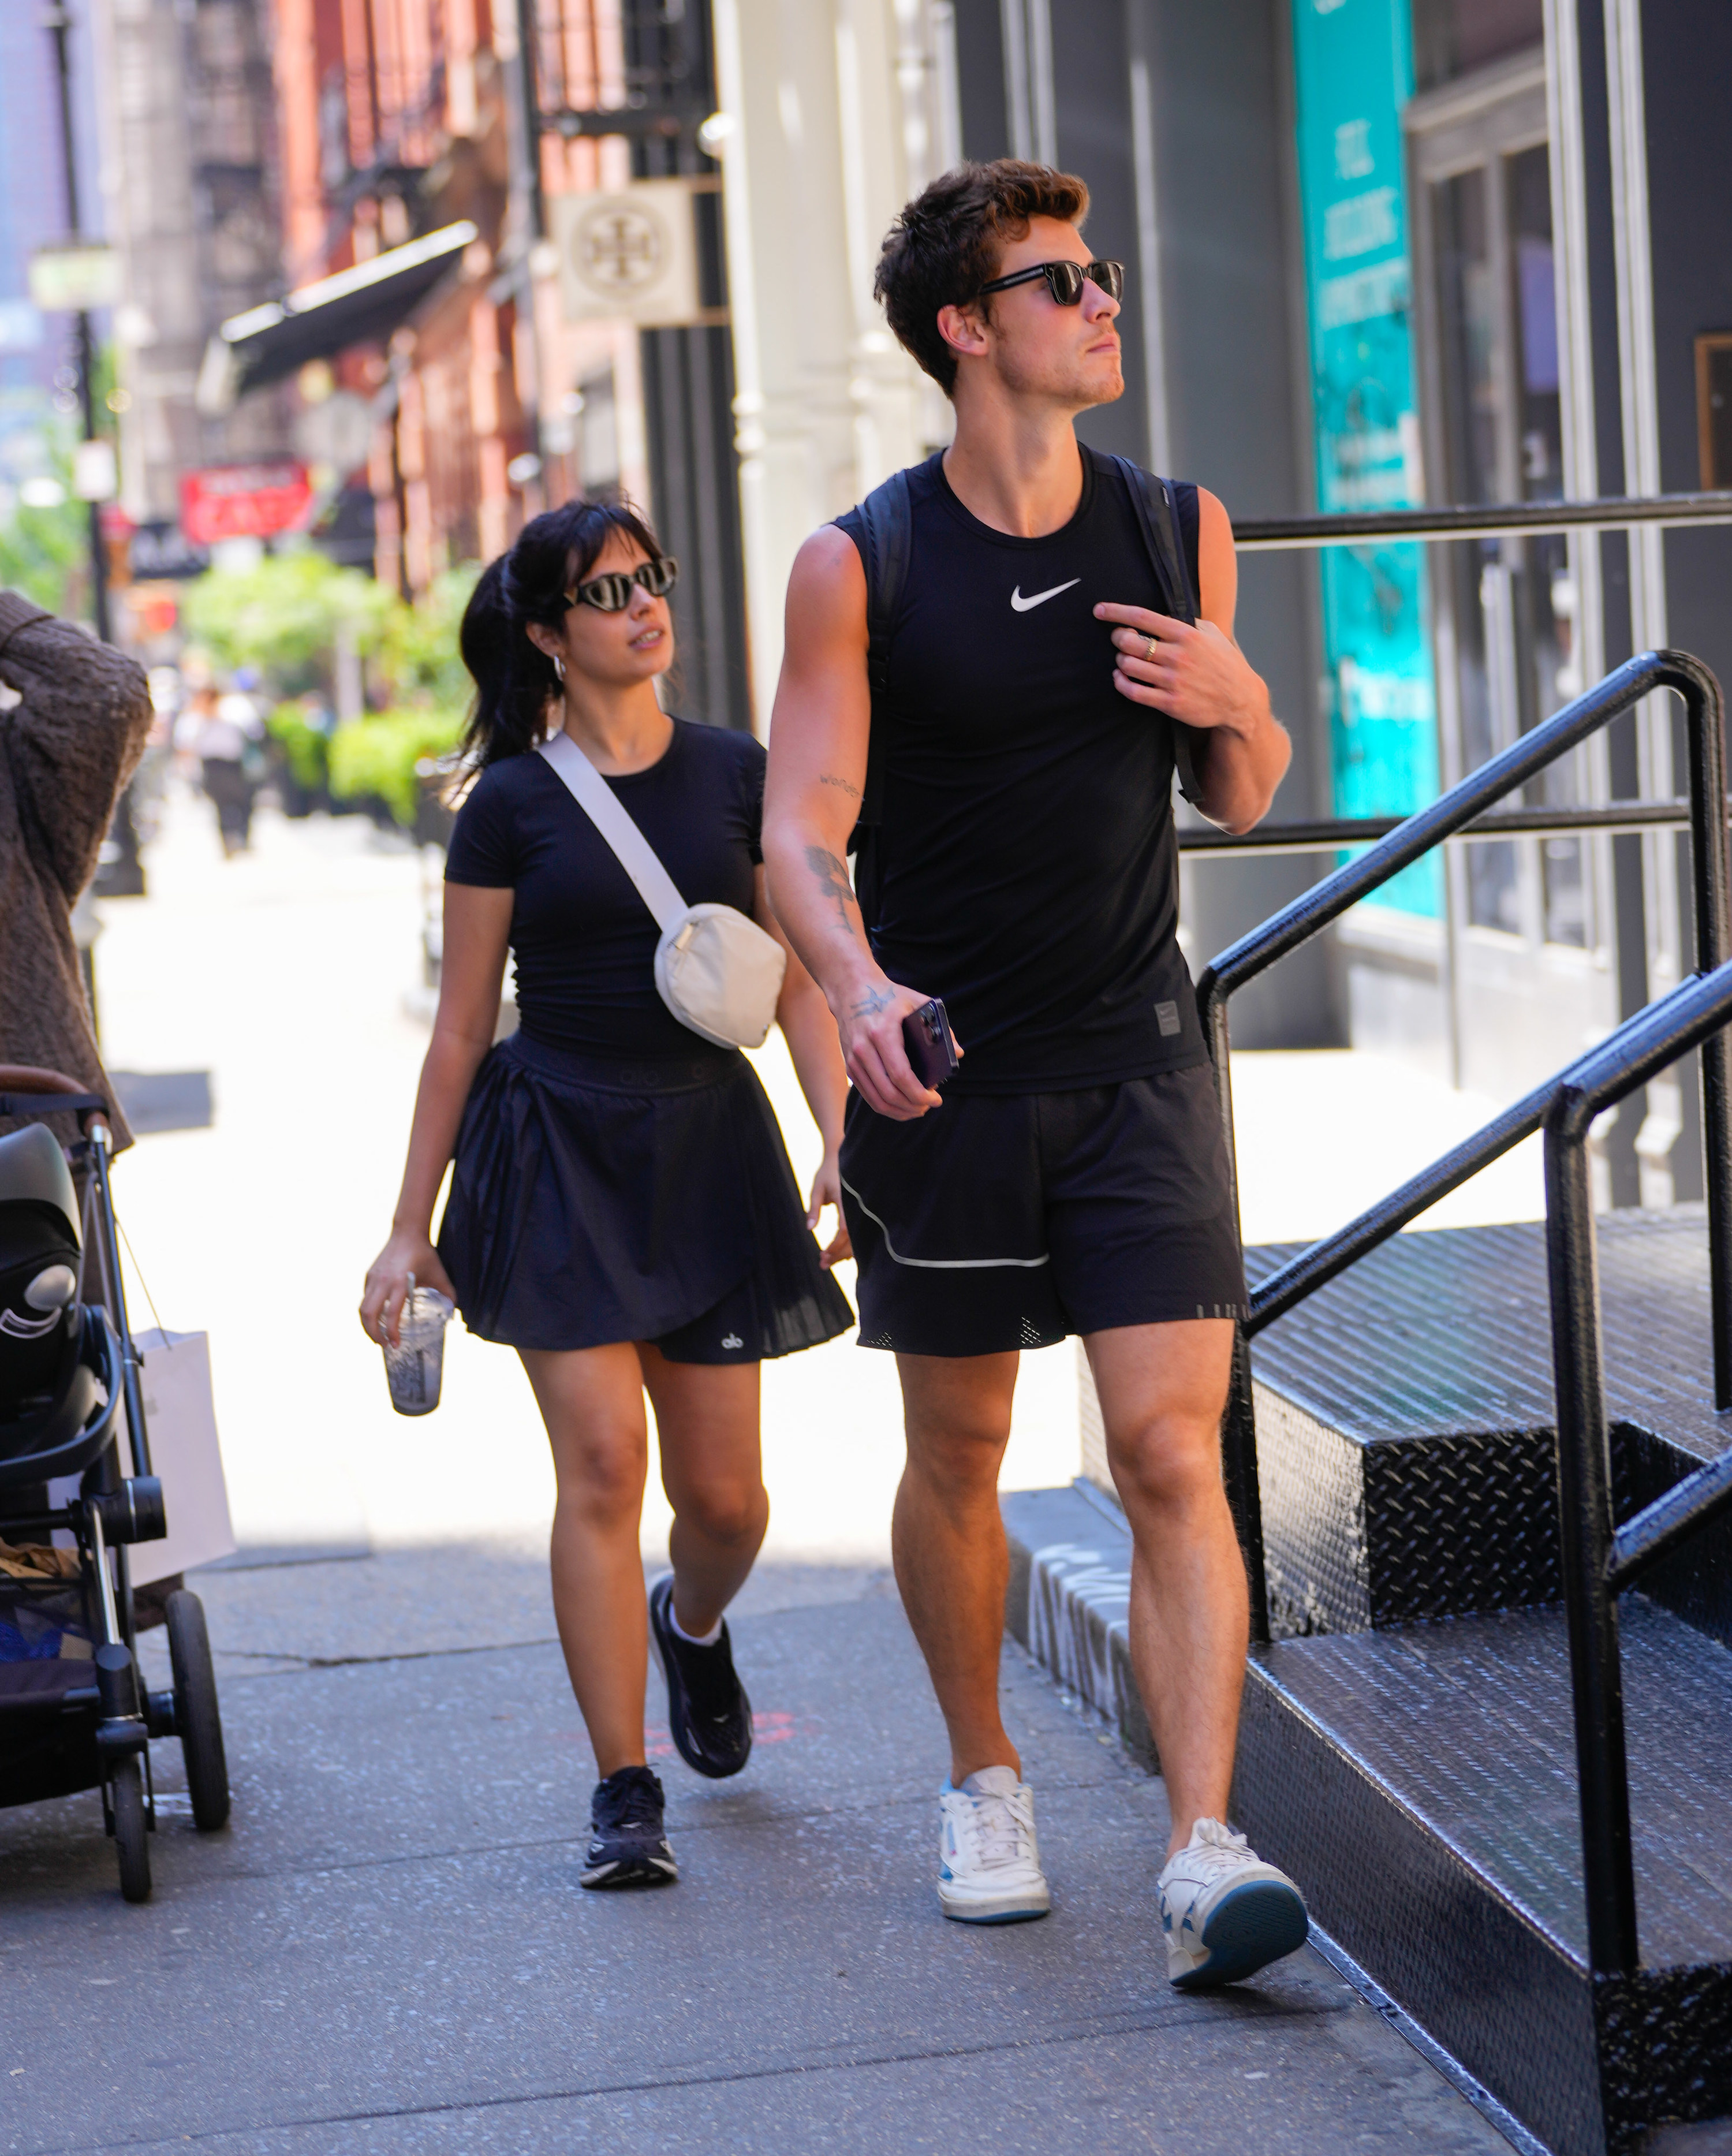 Shawn Mendes and Camila Cabello walking in New York City